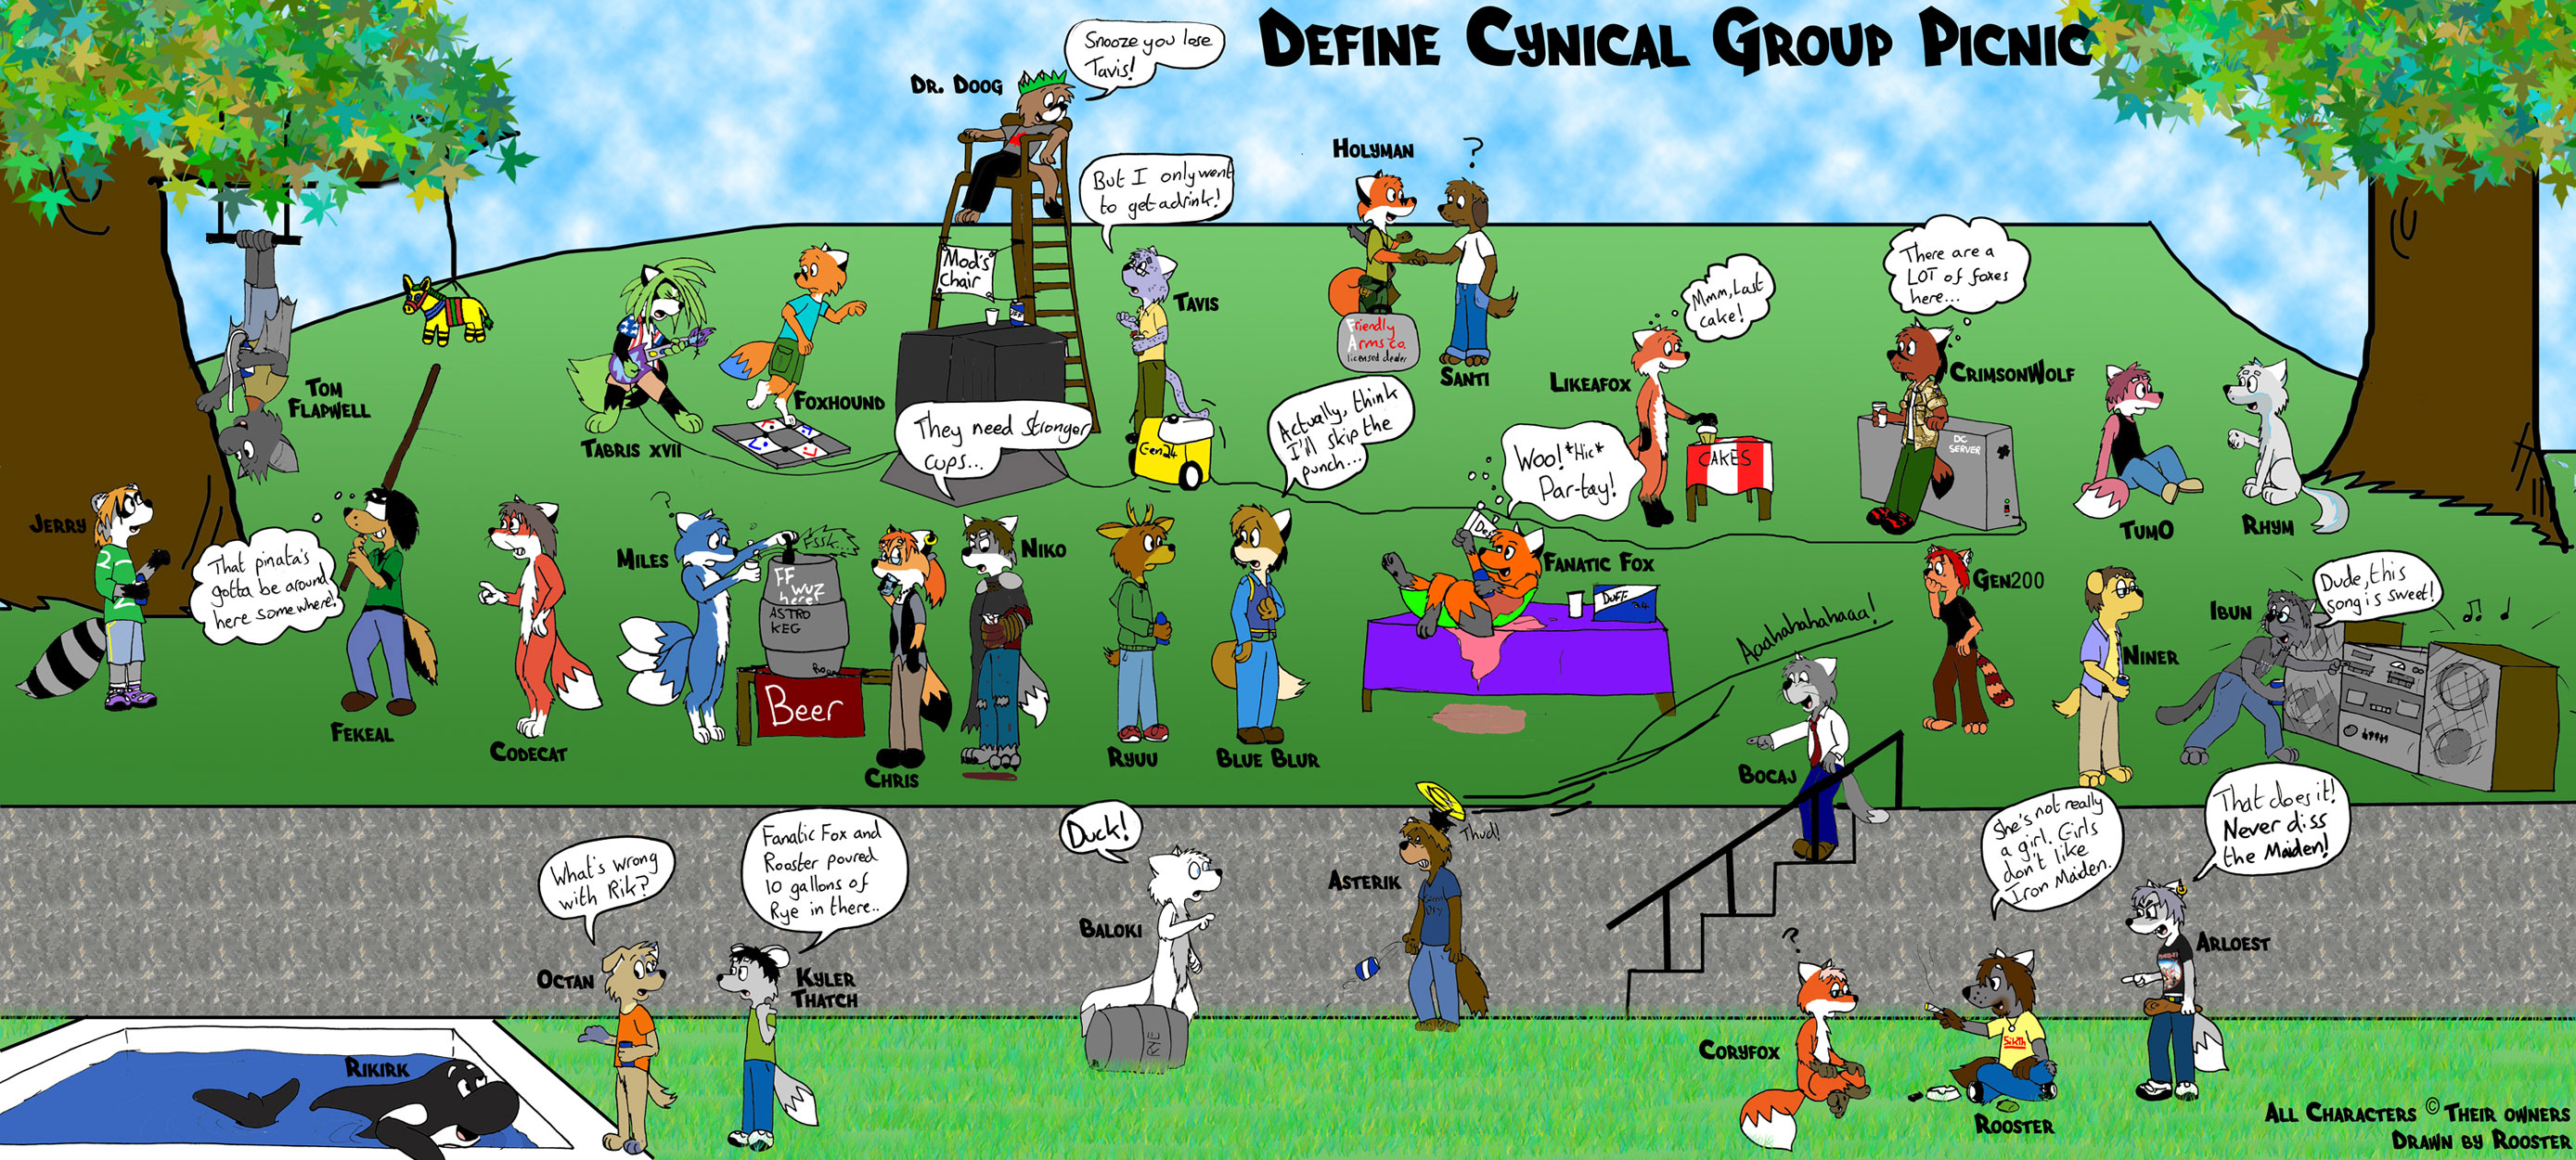 Roo's Define Cynical Picnic
